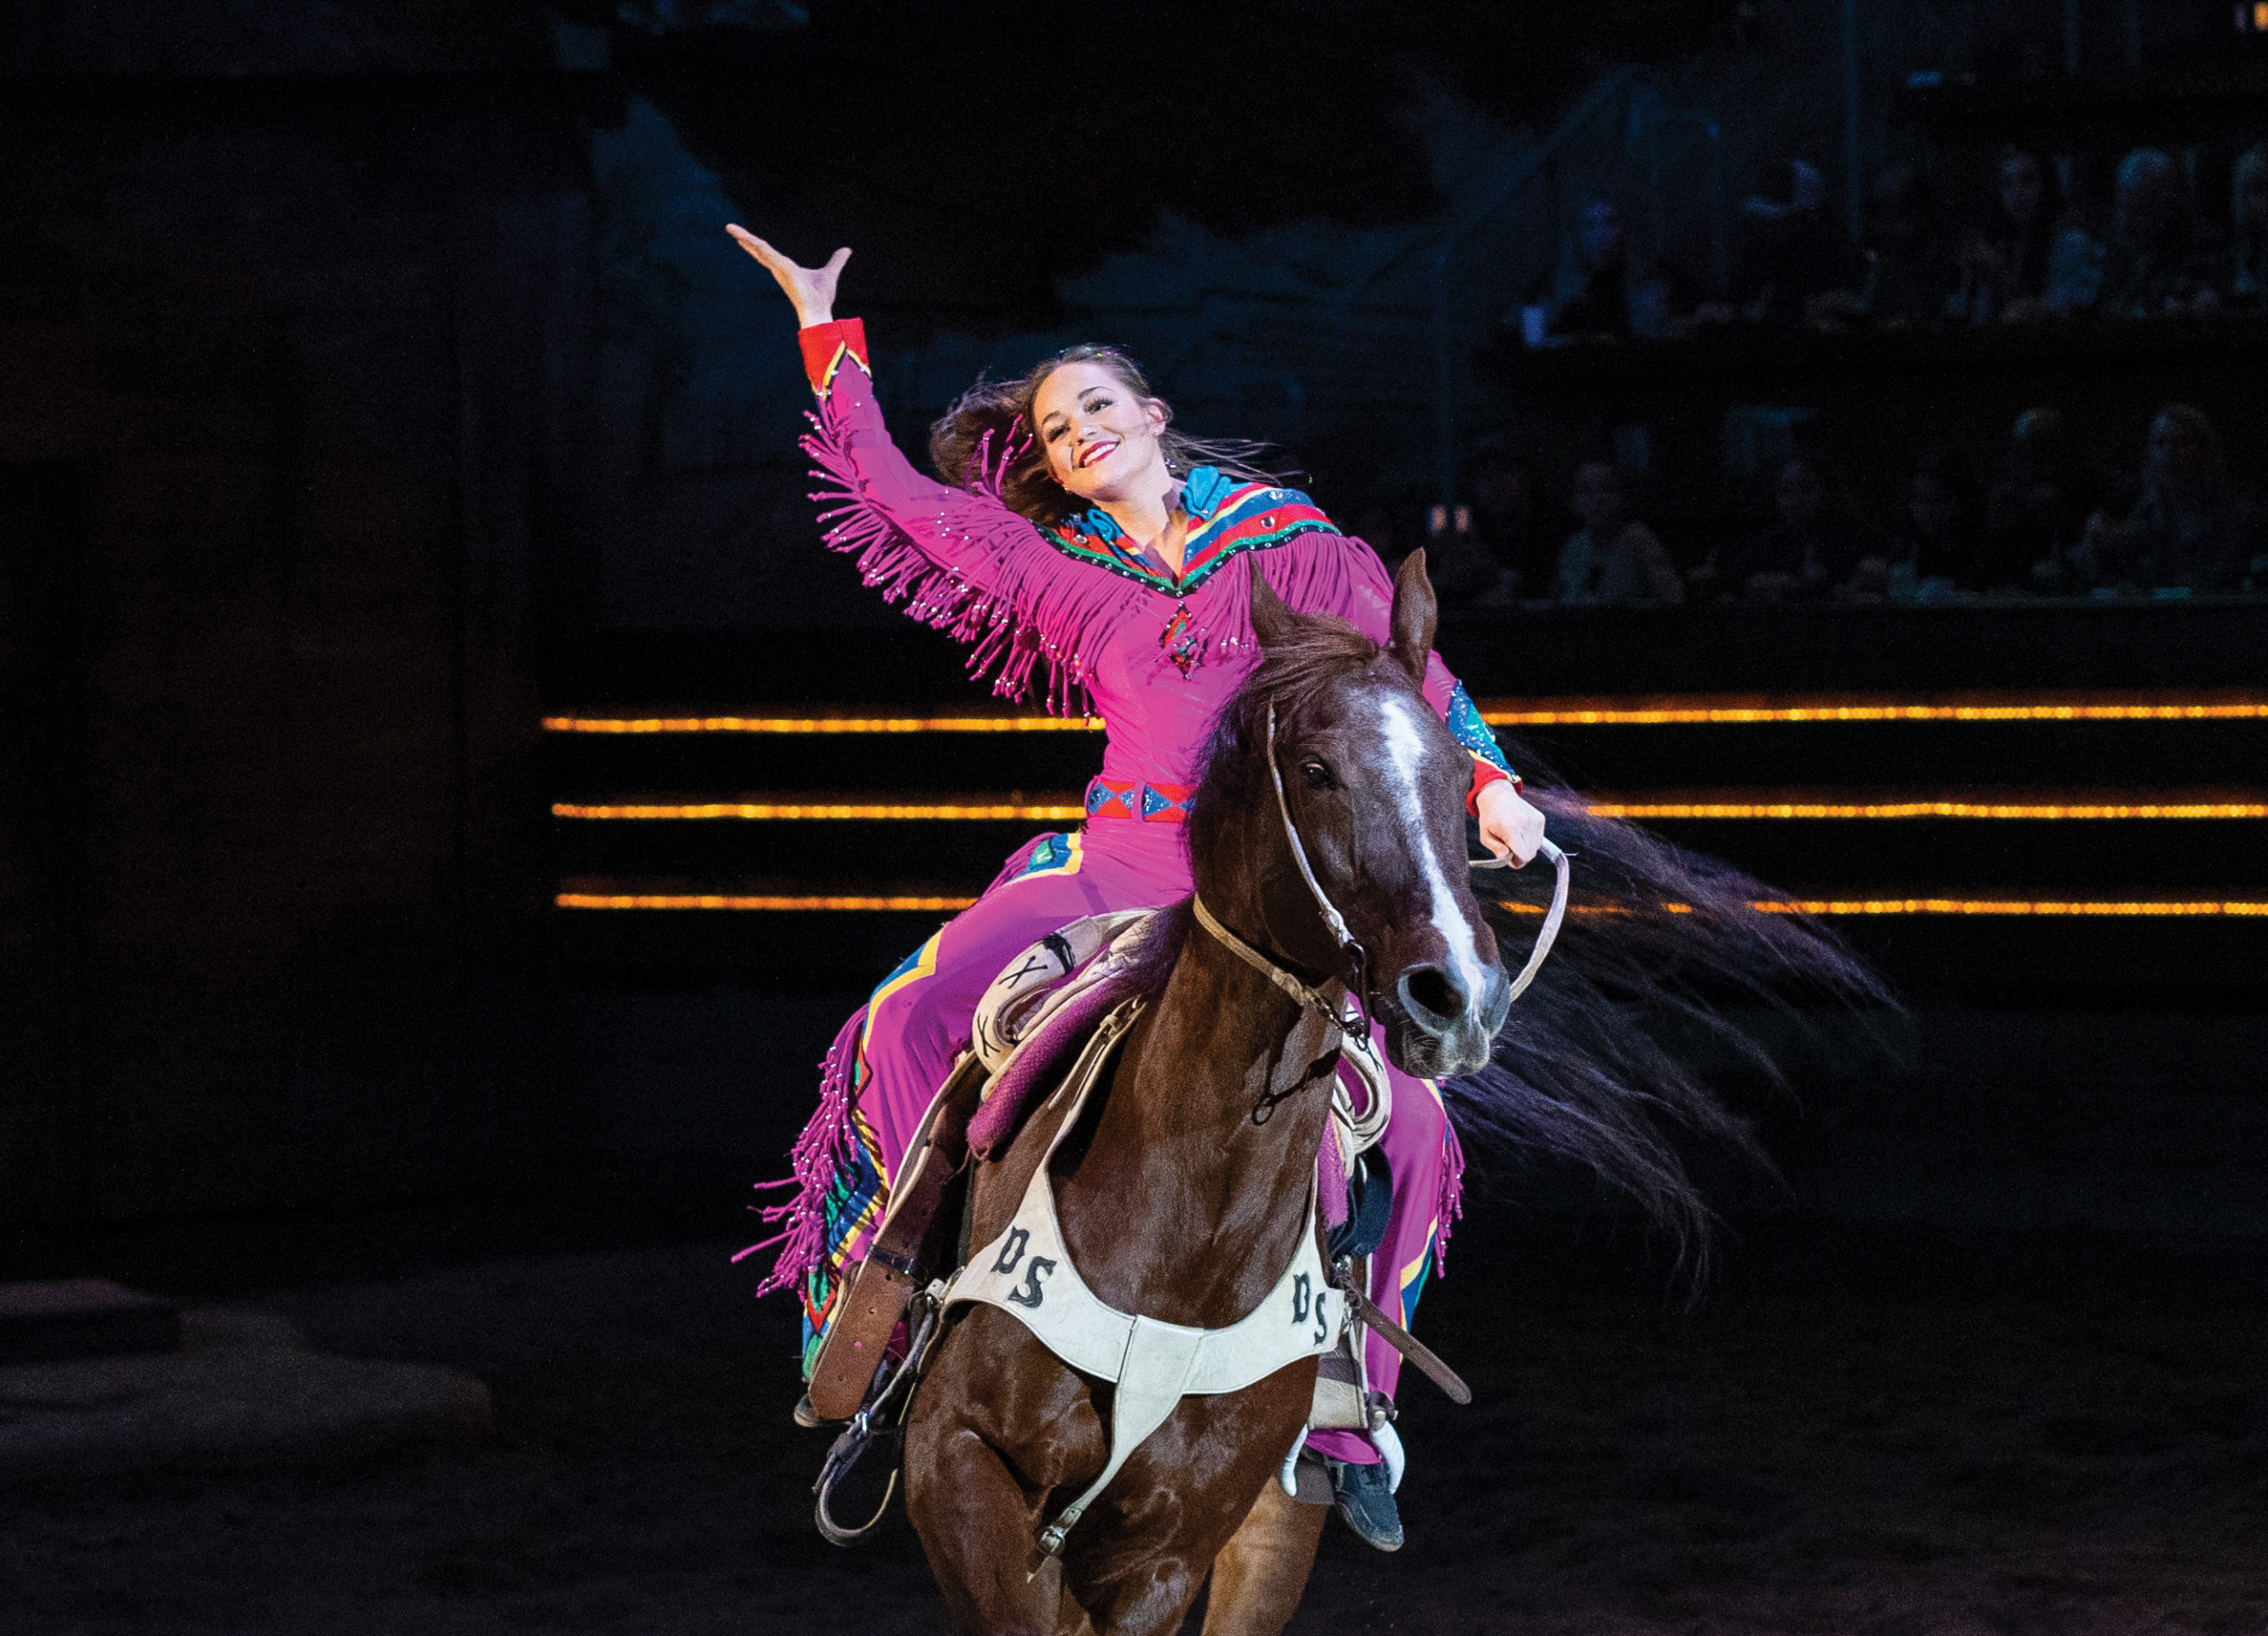 Emma Jo Eversole greets the crowd on horseback at Dolly Parton's Stampede